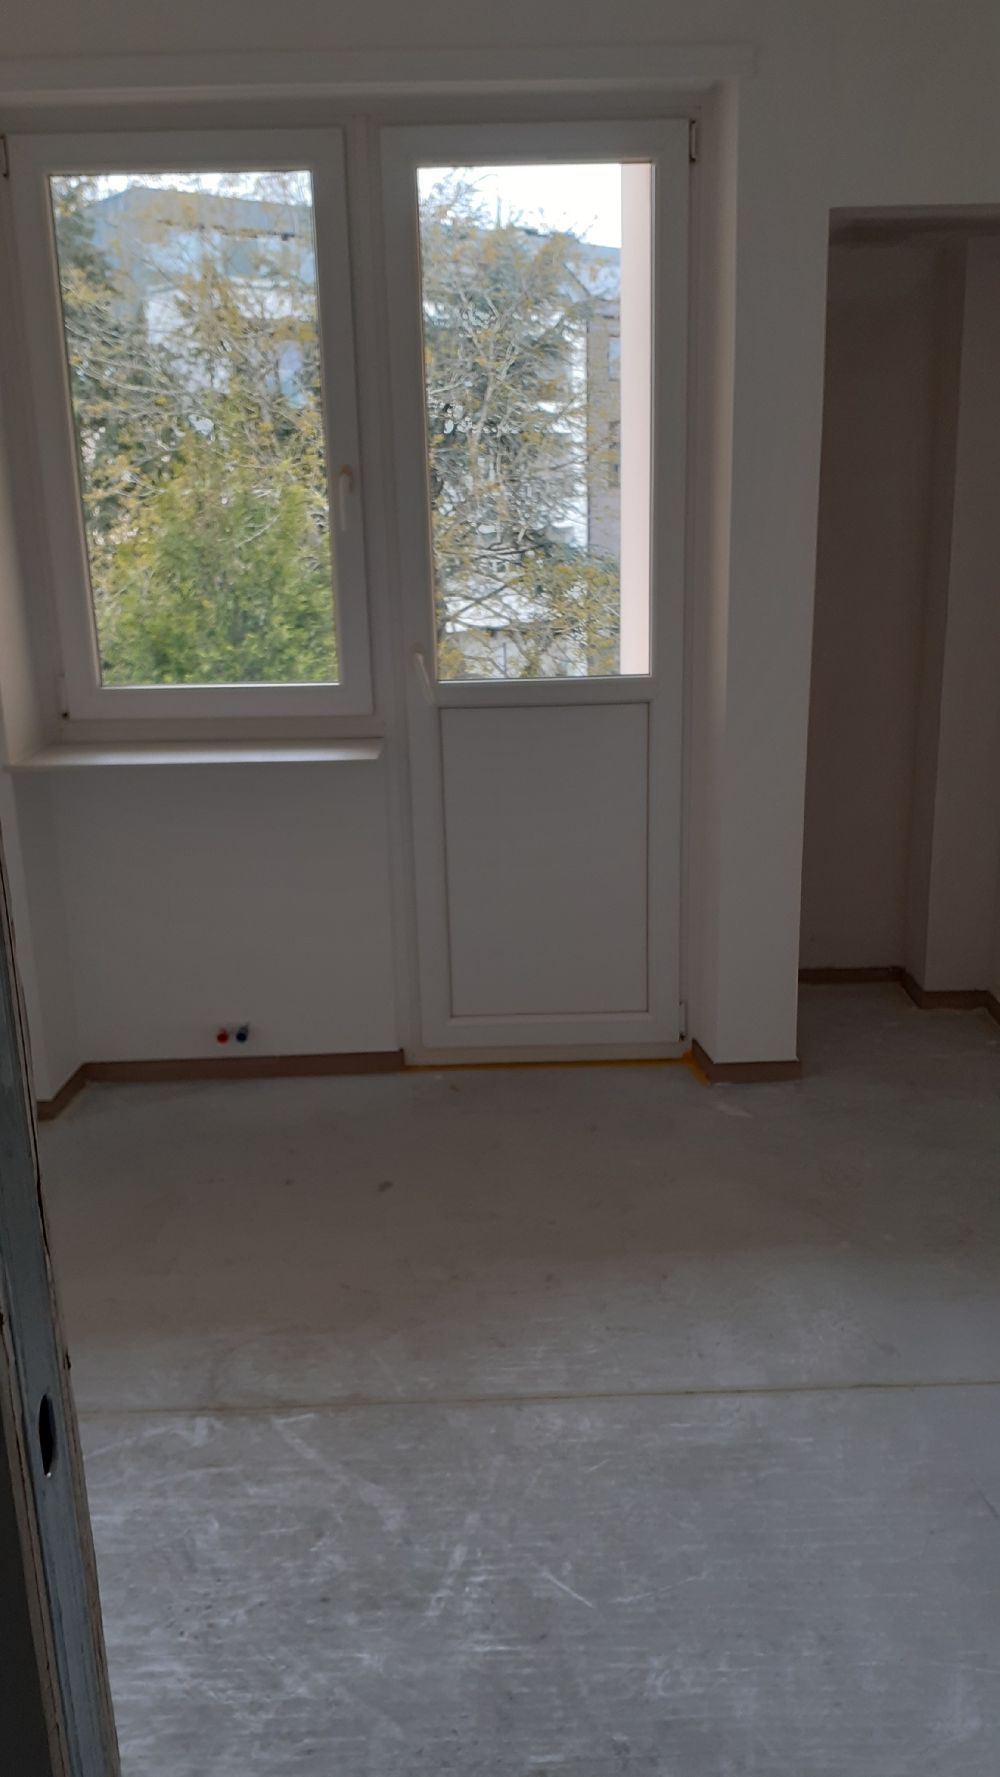 Luxembourg-Belair (Belair) - To rent : apartment